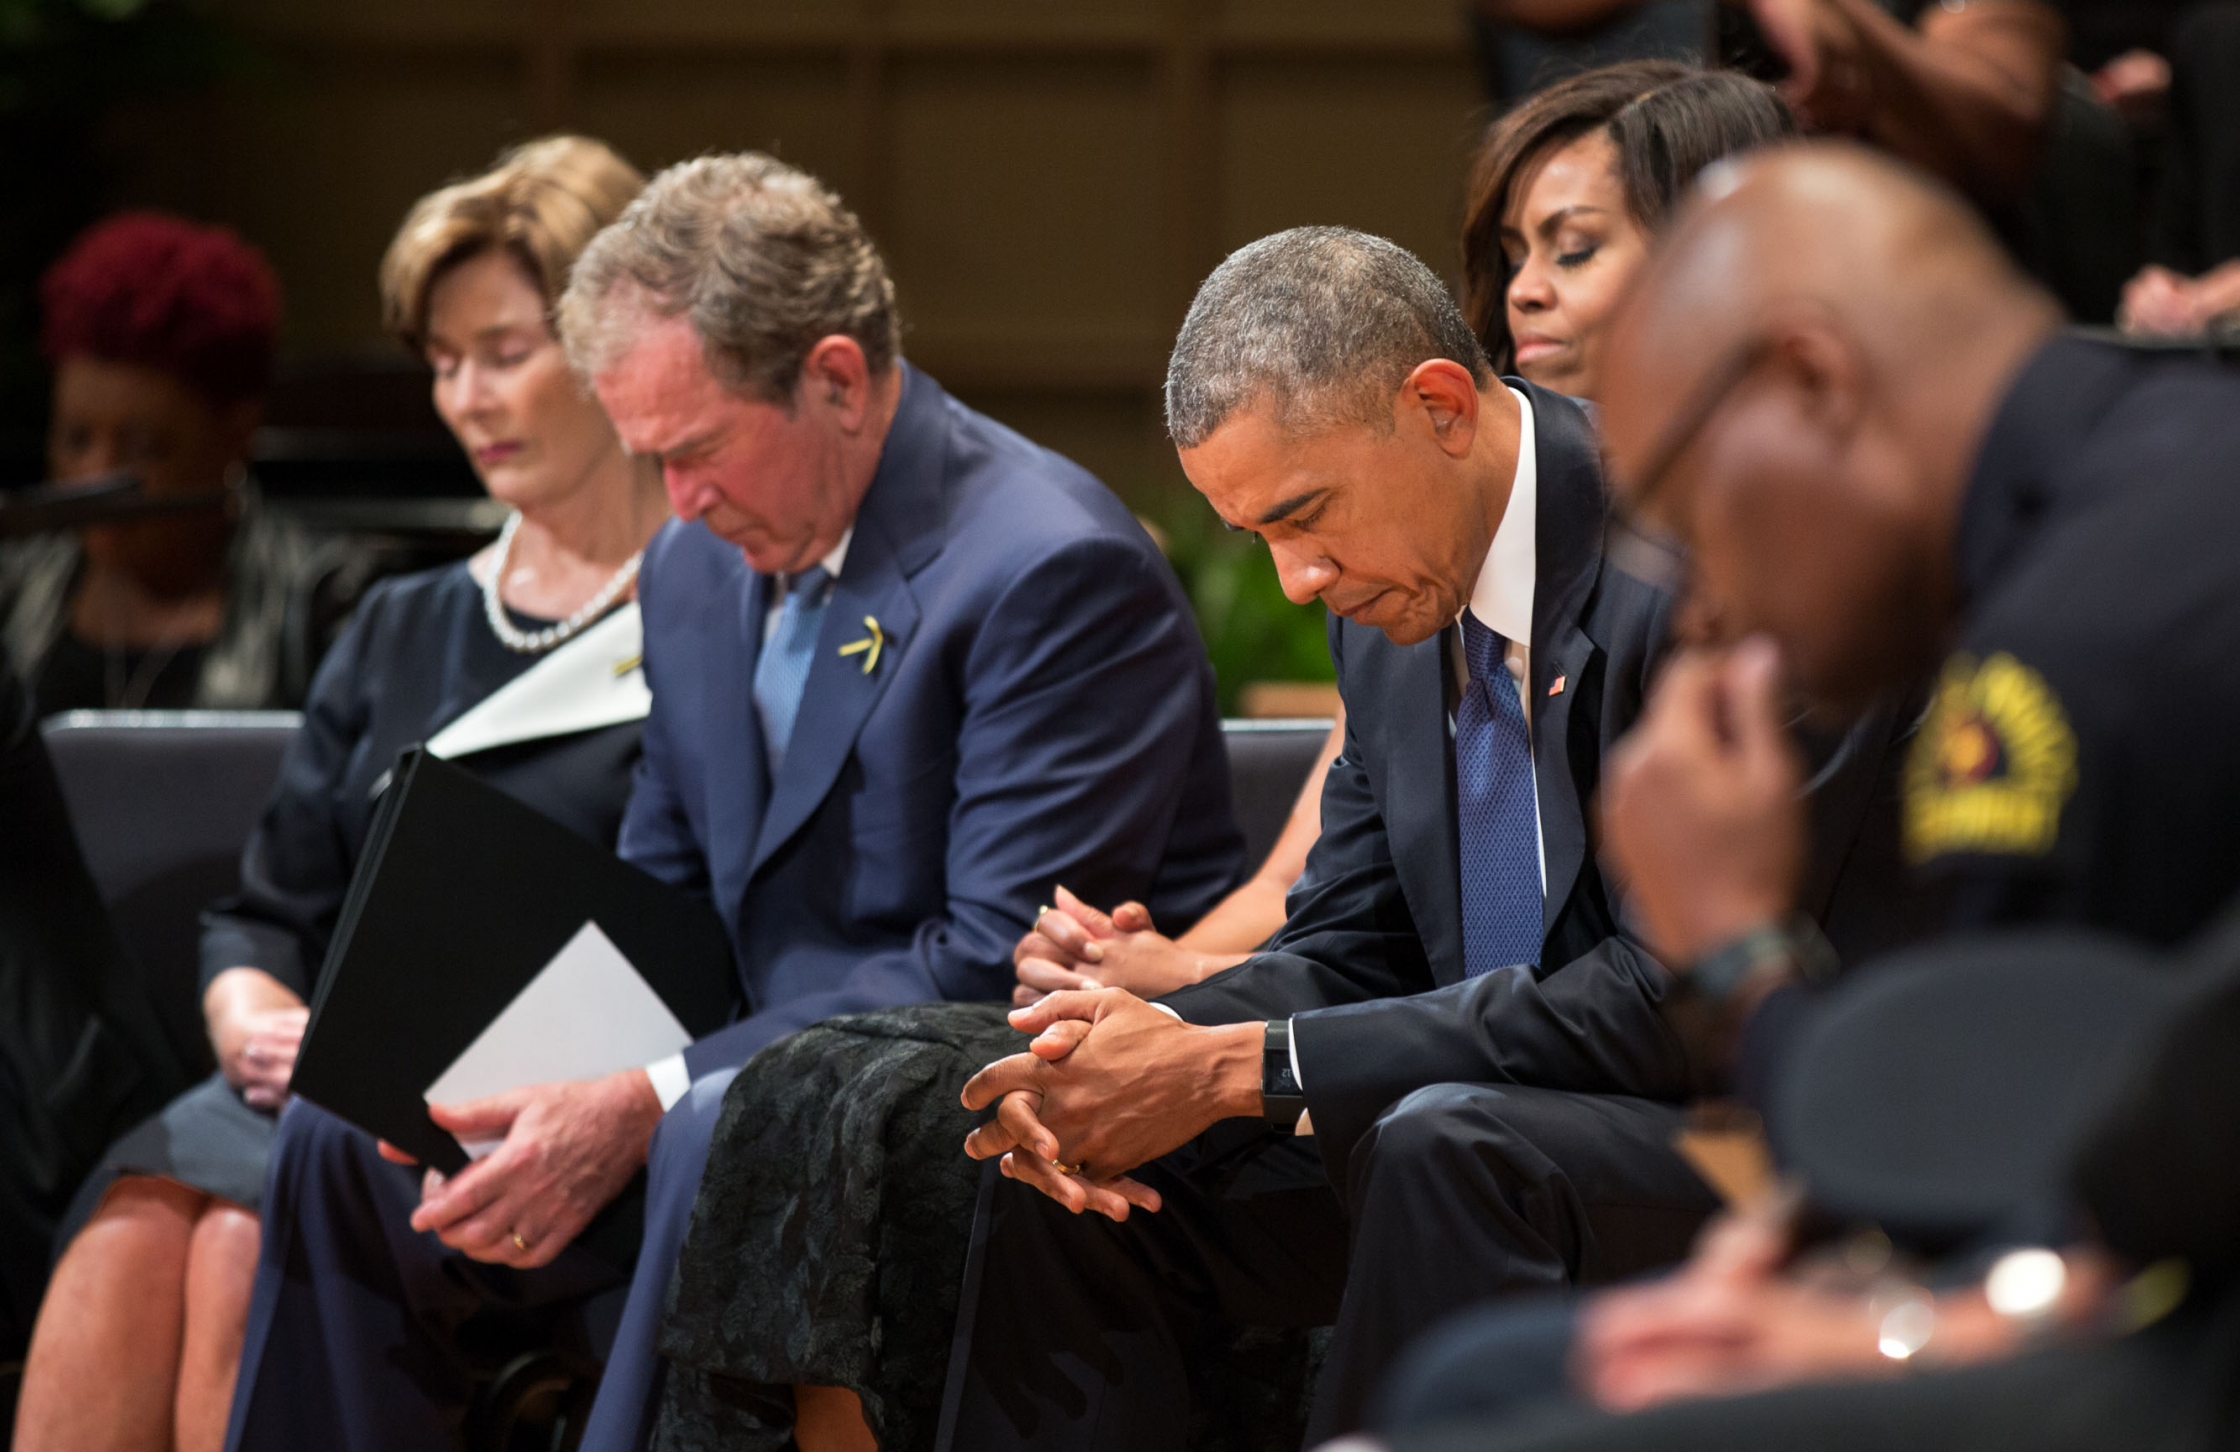 President Barack Obama, First Lady Michelle Obama, former President George W. Bush and former First Lady Laura Bush bow their heads during a prayer at the Interfaith Memorial Service for five fallen police officers in Dallas, Texas, July 12, 2016. Dallas Police Chief David Brown is at right. (Official White House Photo by Pete Souza)